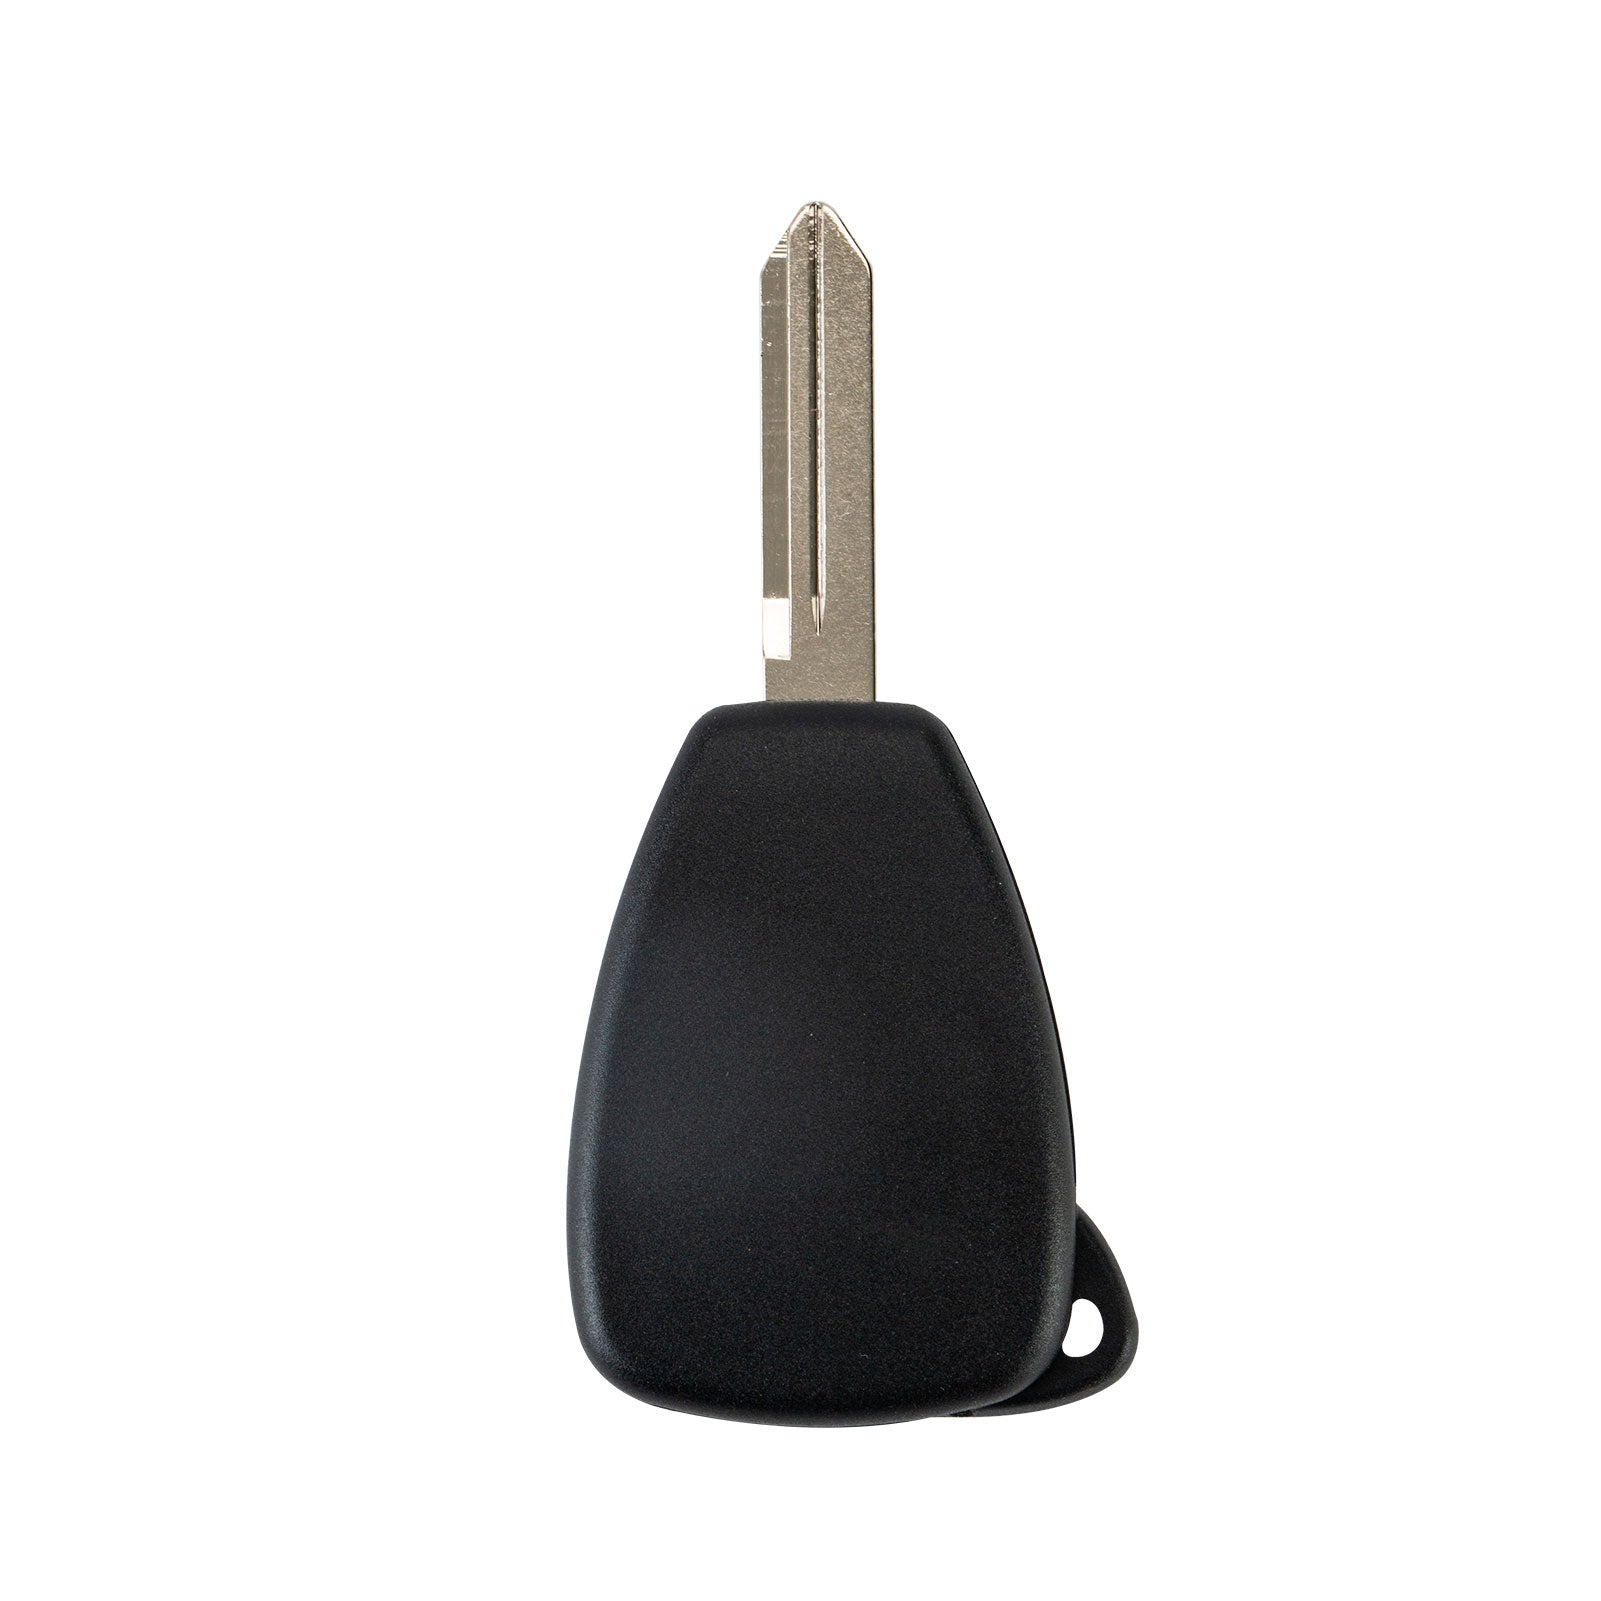 Remote Car Key Fob Replacement for Dodge OHT692427AA M3N5WY72XX fits 2004 2005 2006 2007 2008 Durango